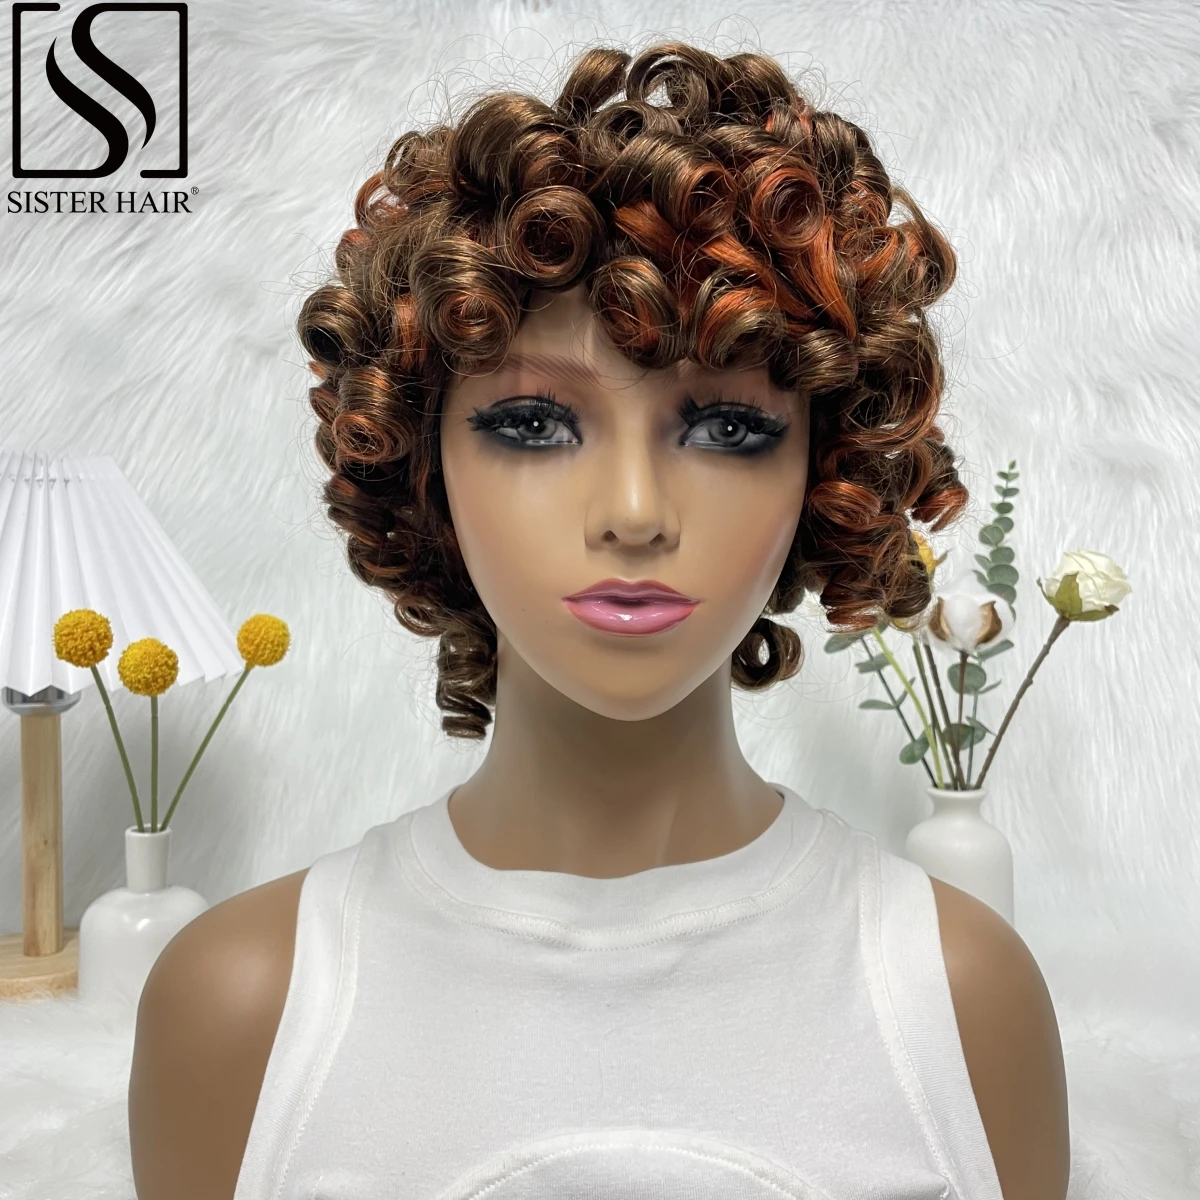 

Human Hair Wig With Bangs 4/350 Colored Bouncy Curly 200% Density Short Afro Kinky Curly Full Machine Made Wigs for Black Women